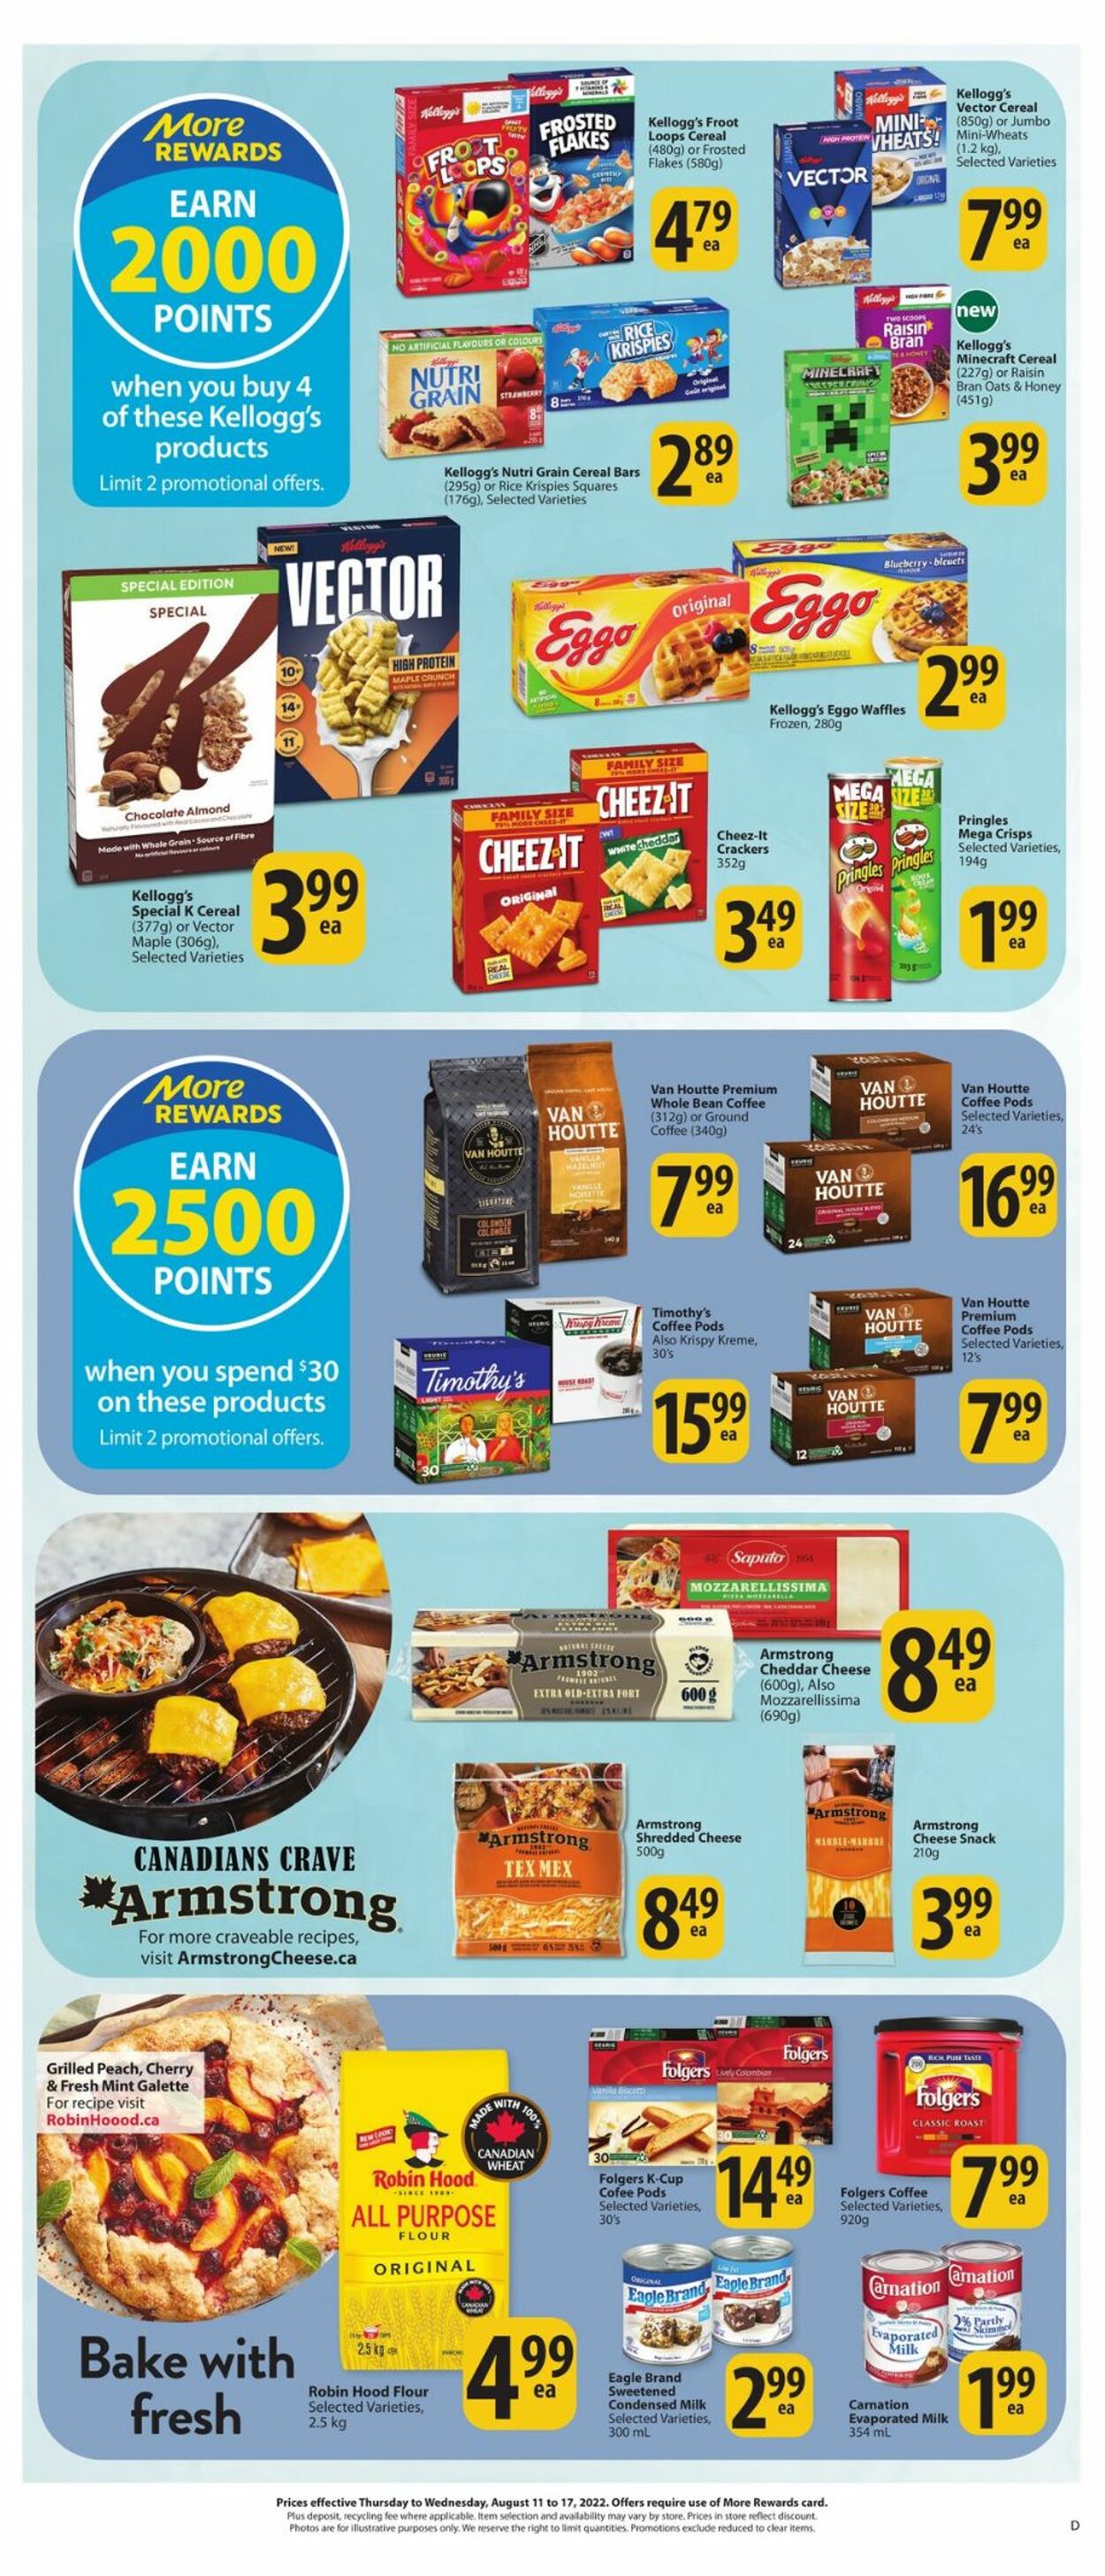 Circulaire Save-On-Foods 11.08.2022 - 17.08.2022